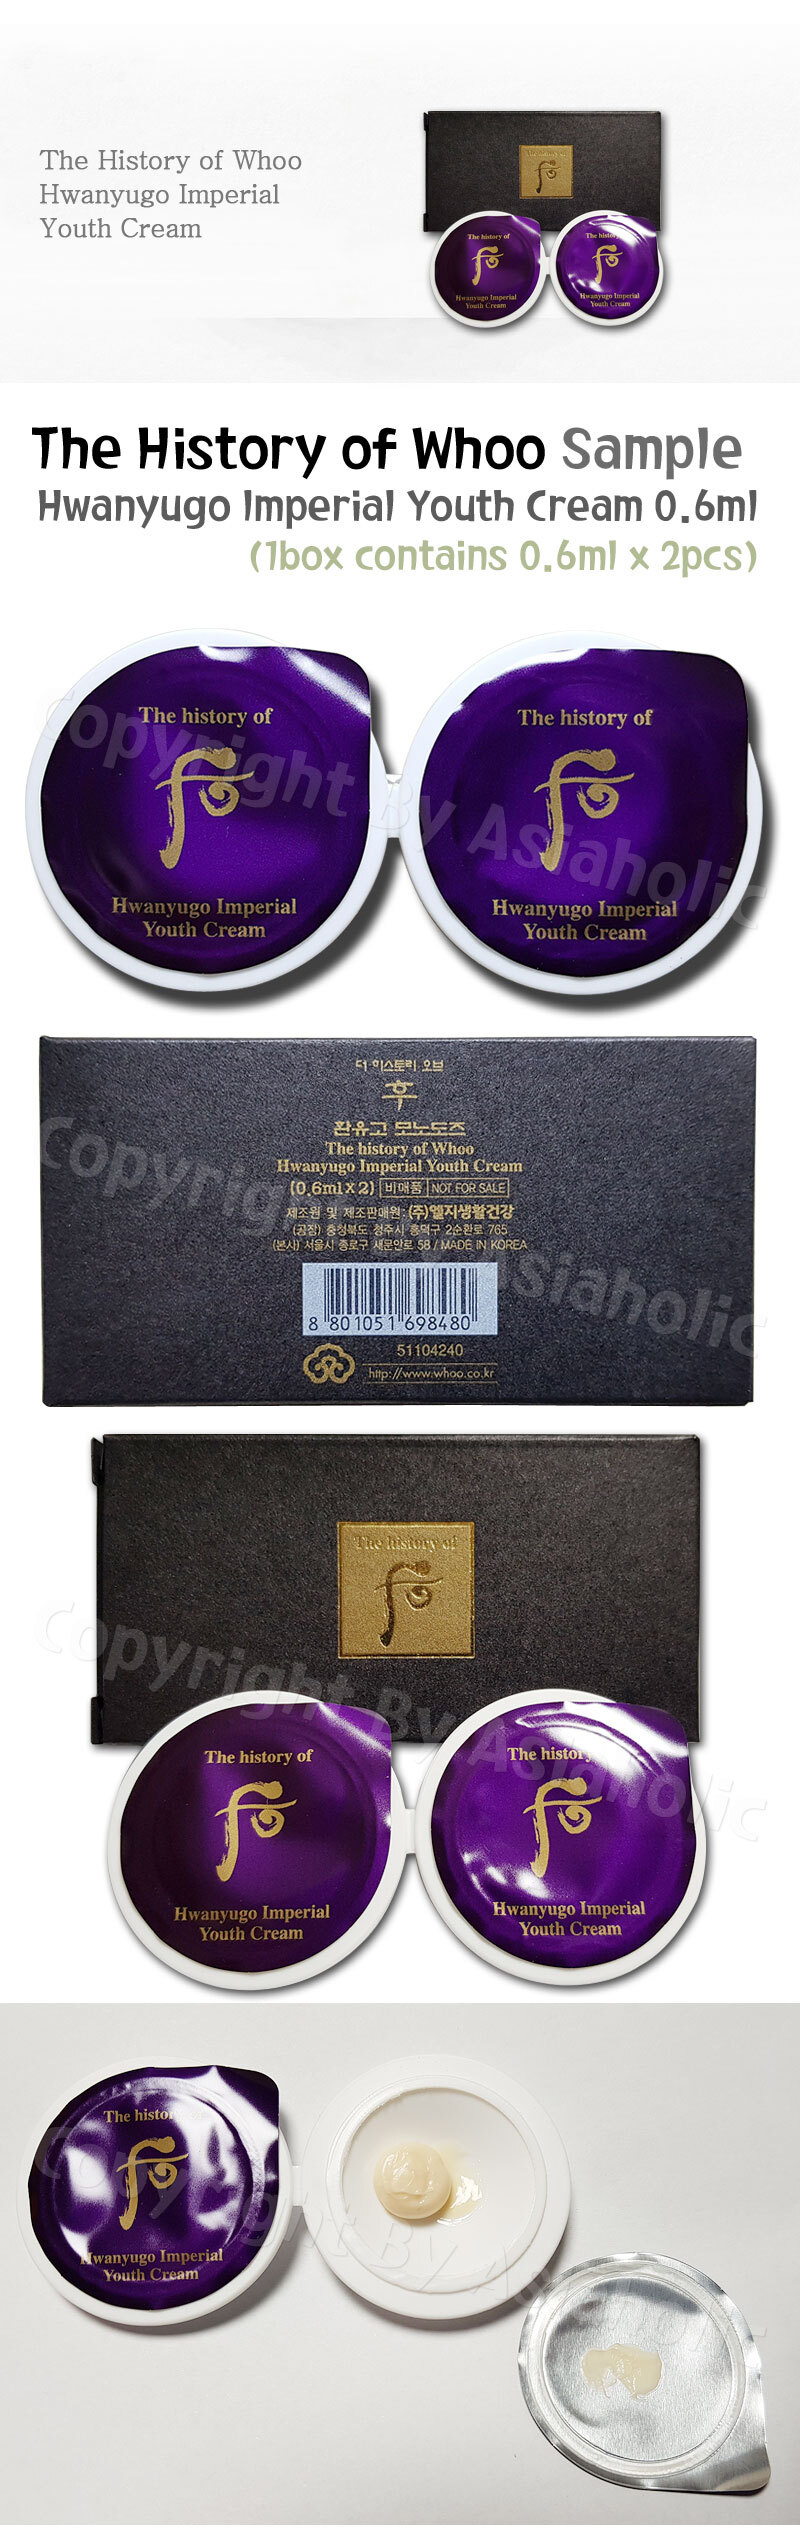 The history of Whoo Hwanyugo Imperial Youth Cream 0.6ml x 2pcs (1Box) Newist Version